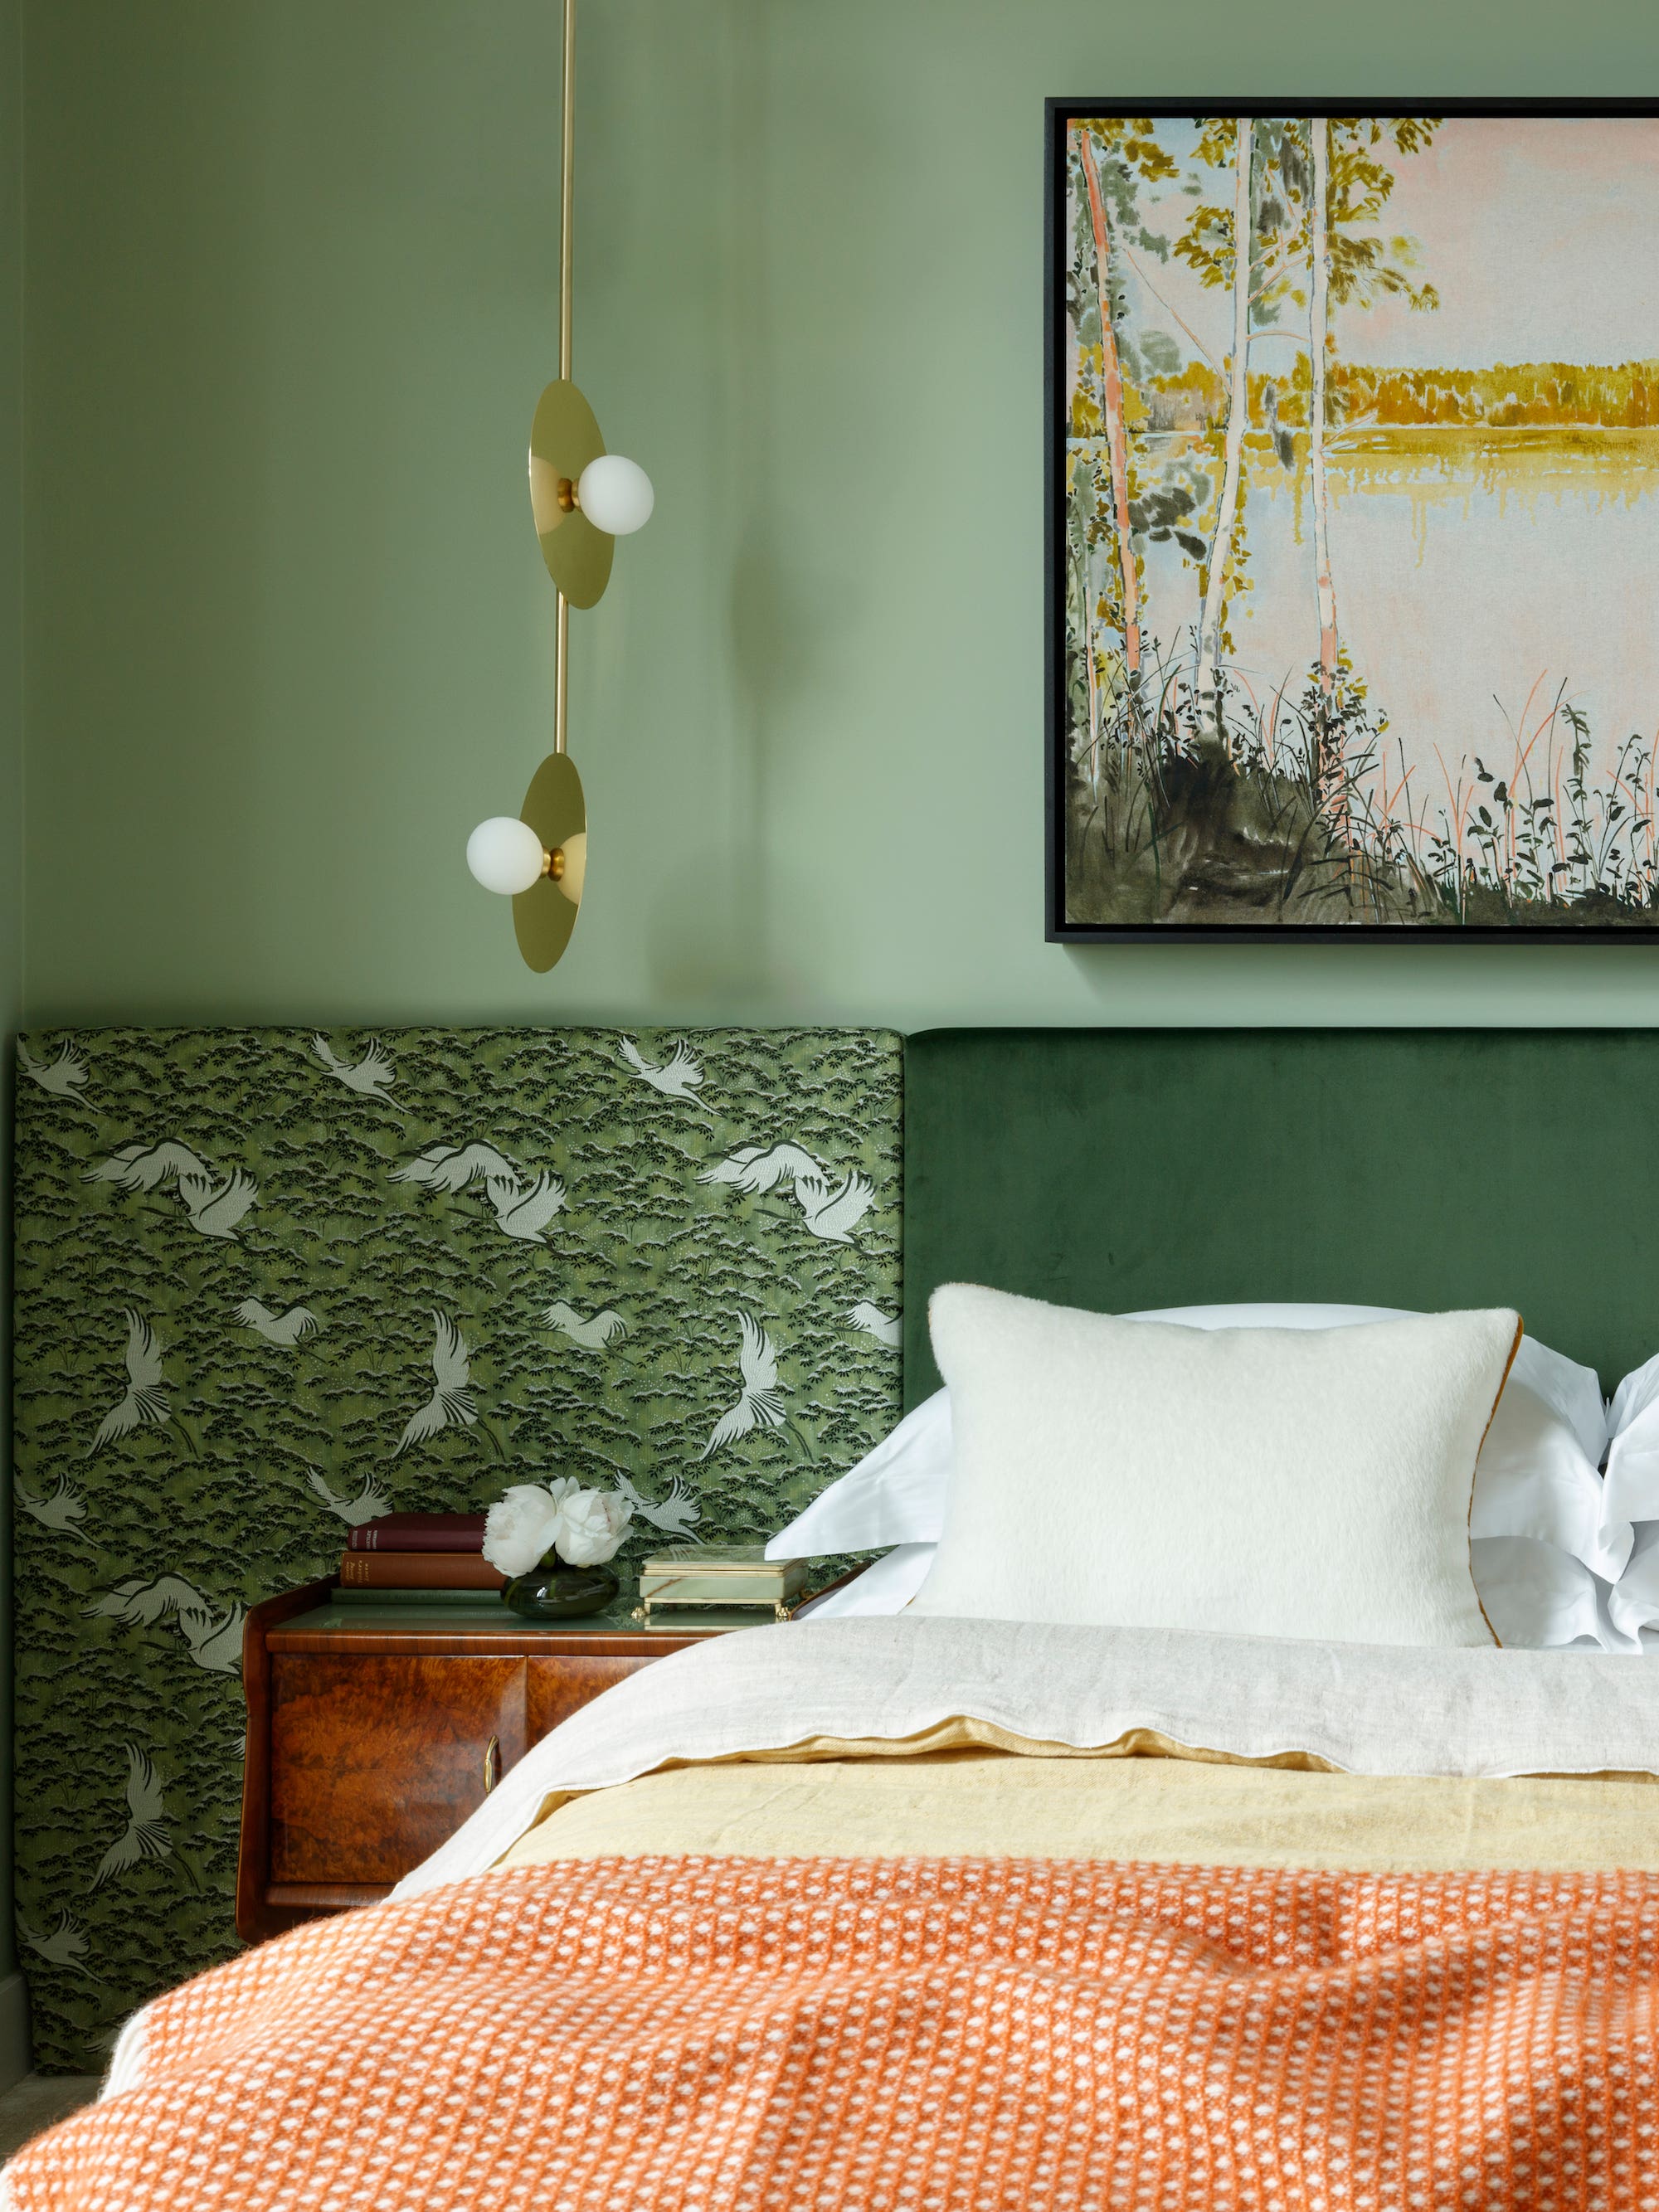 The Case for Funky Headboards Couldn’t Be Clearer